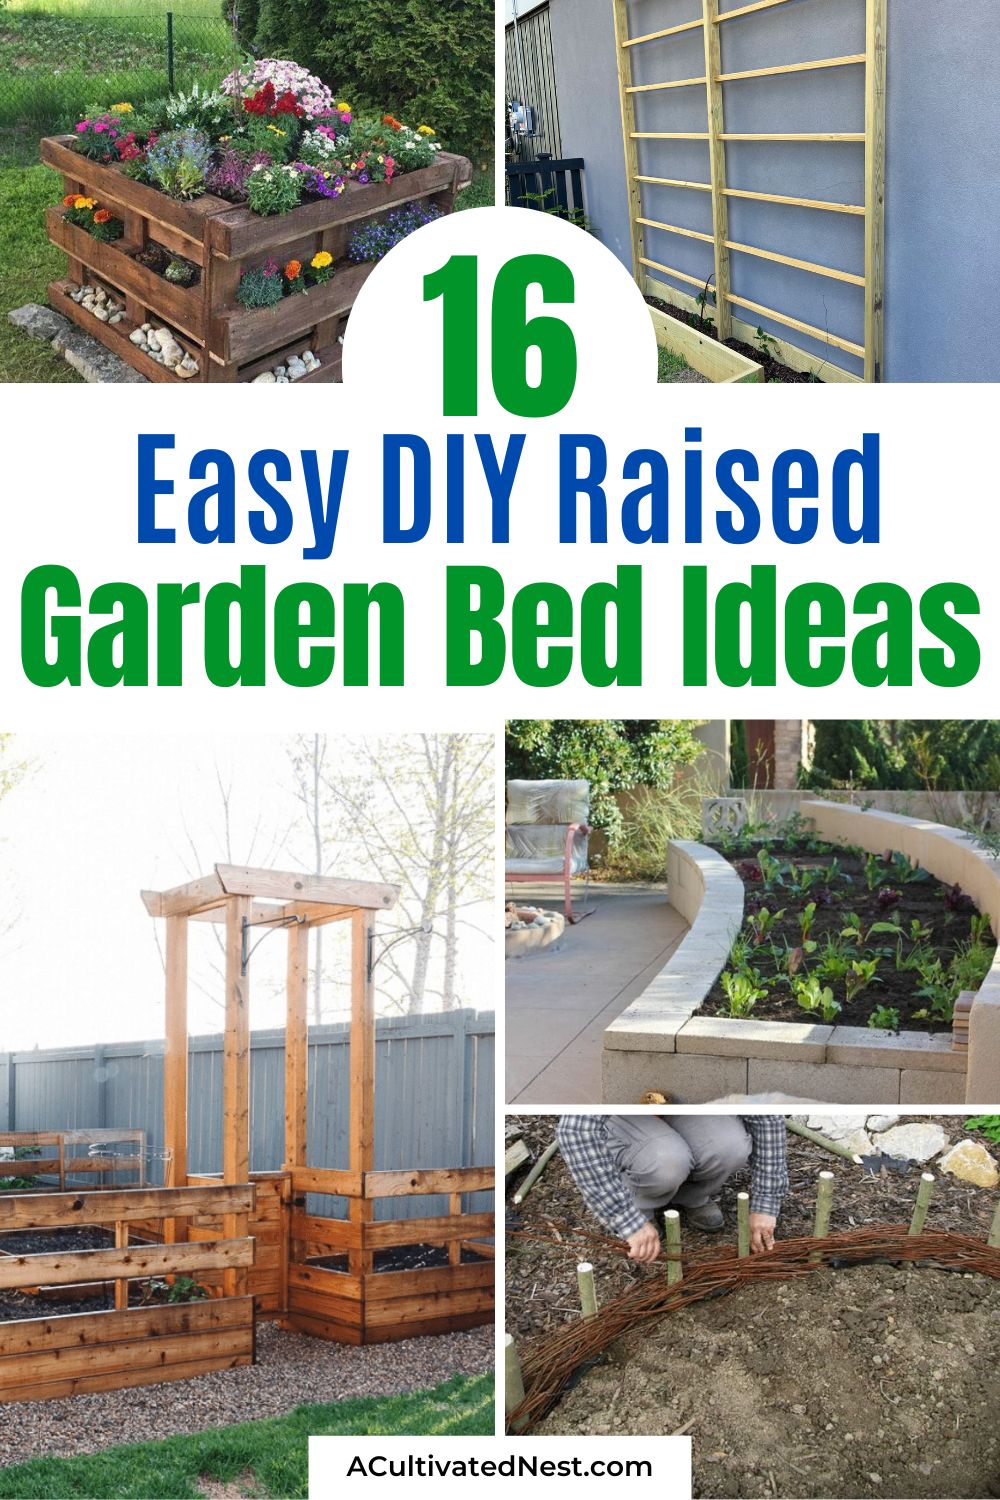 16 Easy DIY Raised Garden Bed Ideas- Dreaming of a flourishing garden? Explore effortless DIY raised garden bed ideas to elevate your green space. From pallets to concrete blocks, find the perfect design to suit your style and nurture your plants with love. | #gardening #gardenDIY #raisedGarden #vegetableGardening #ACultivatedNest